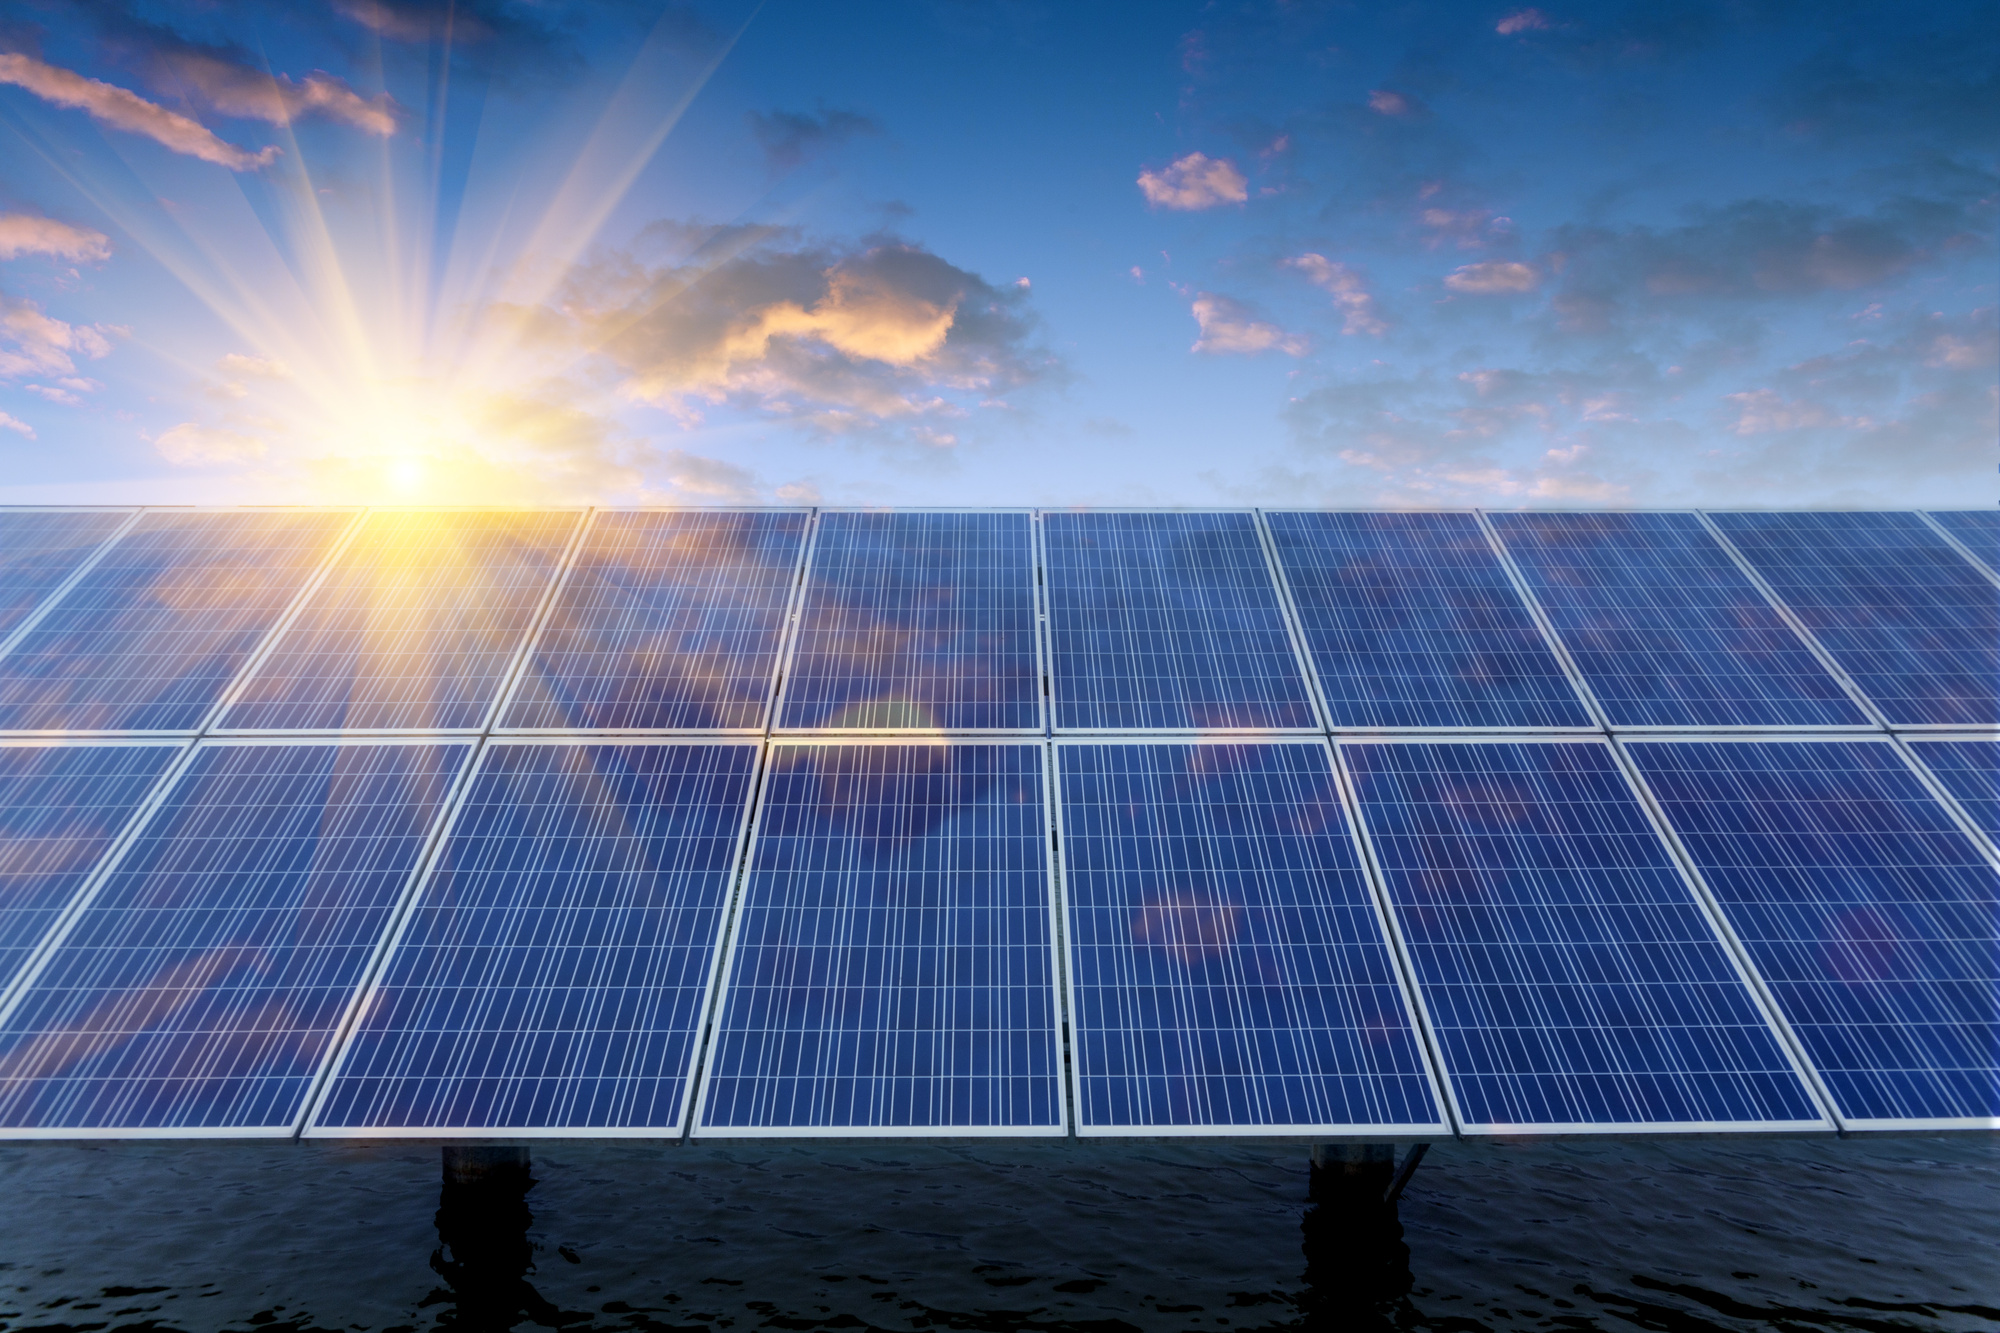 Are you thinking about installing solar panels in Arkansas? Read our short article to help you prepare for the installation.